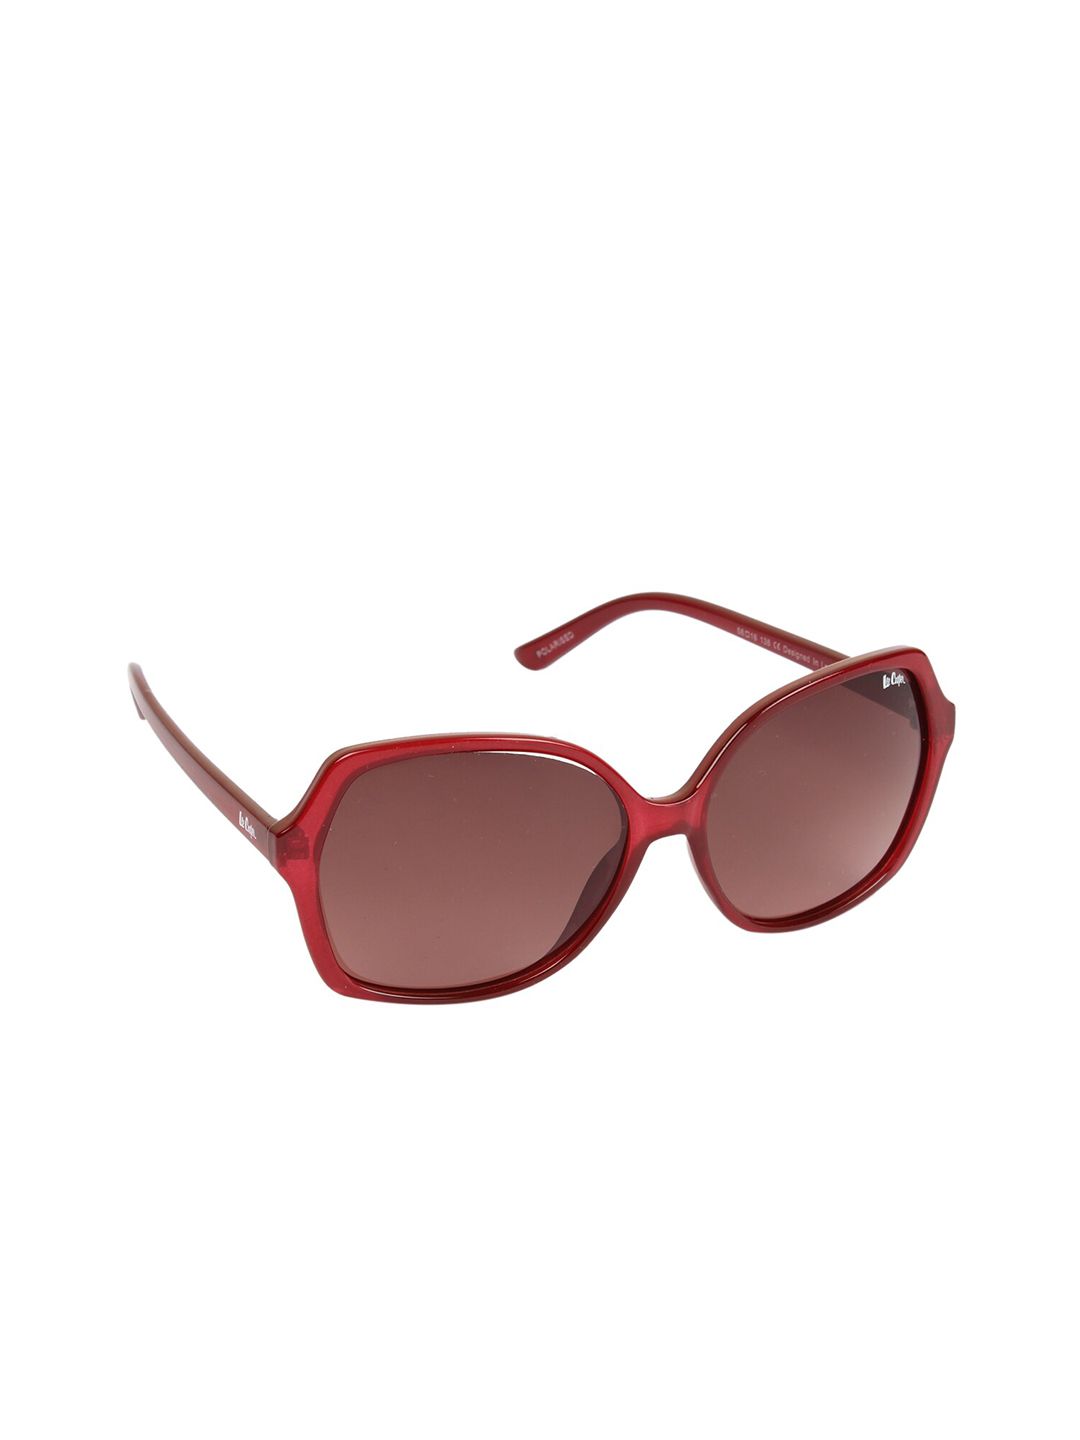 Lee Cooper Women Brown Lens & Red Square Sunglasses with Polarised Lens LC9164NTPOL Price in India